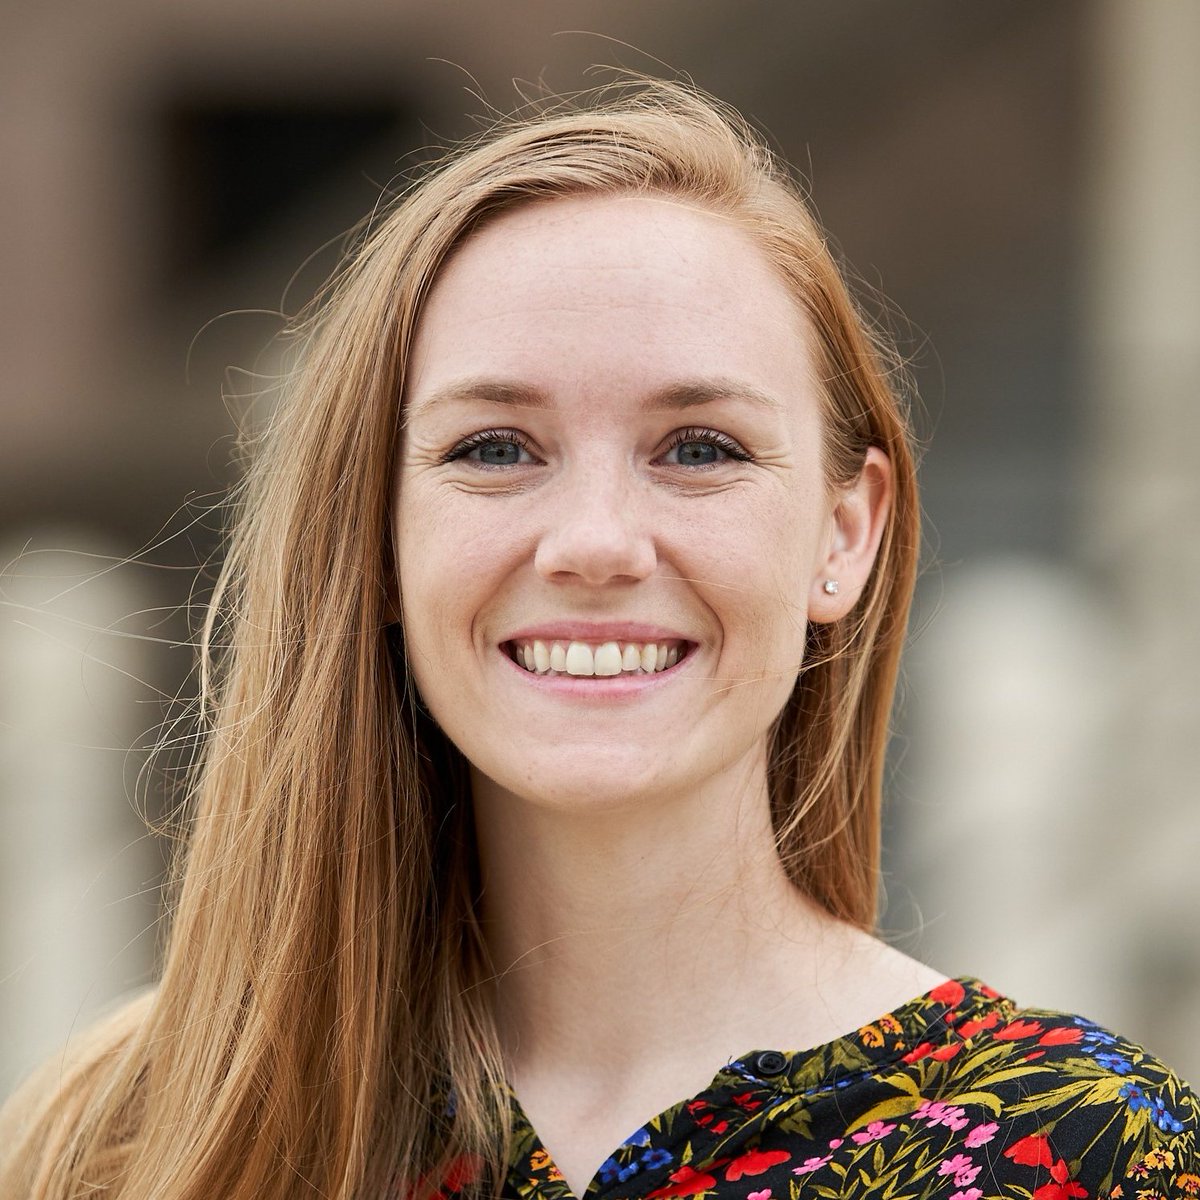 We’re thrilled to welcome Dr. Rachel Davidson (@RachelDDavidson) to the faculty of @ChemistryUD! Rachel will join us this summer as an Assistant Prof to establish her research program centered in electrochemistry, material synthesis, energy sustainability and machine learning.